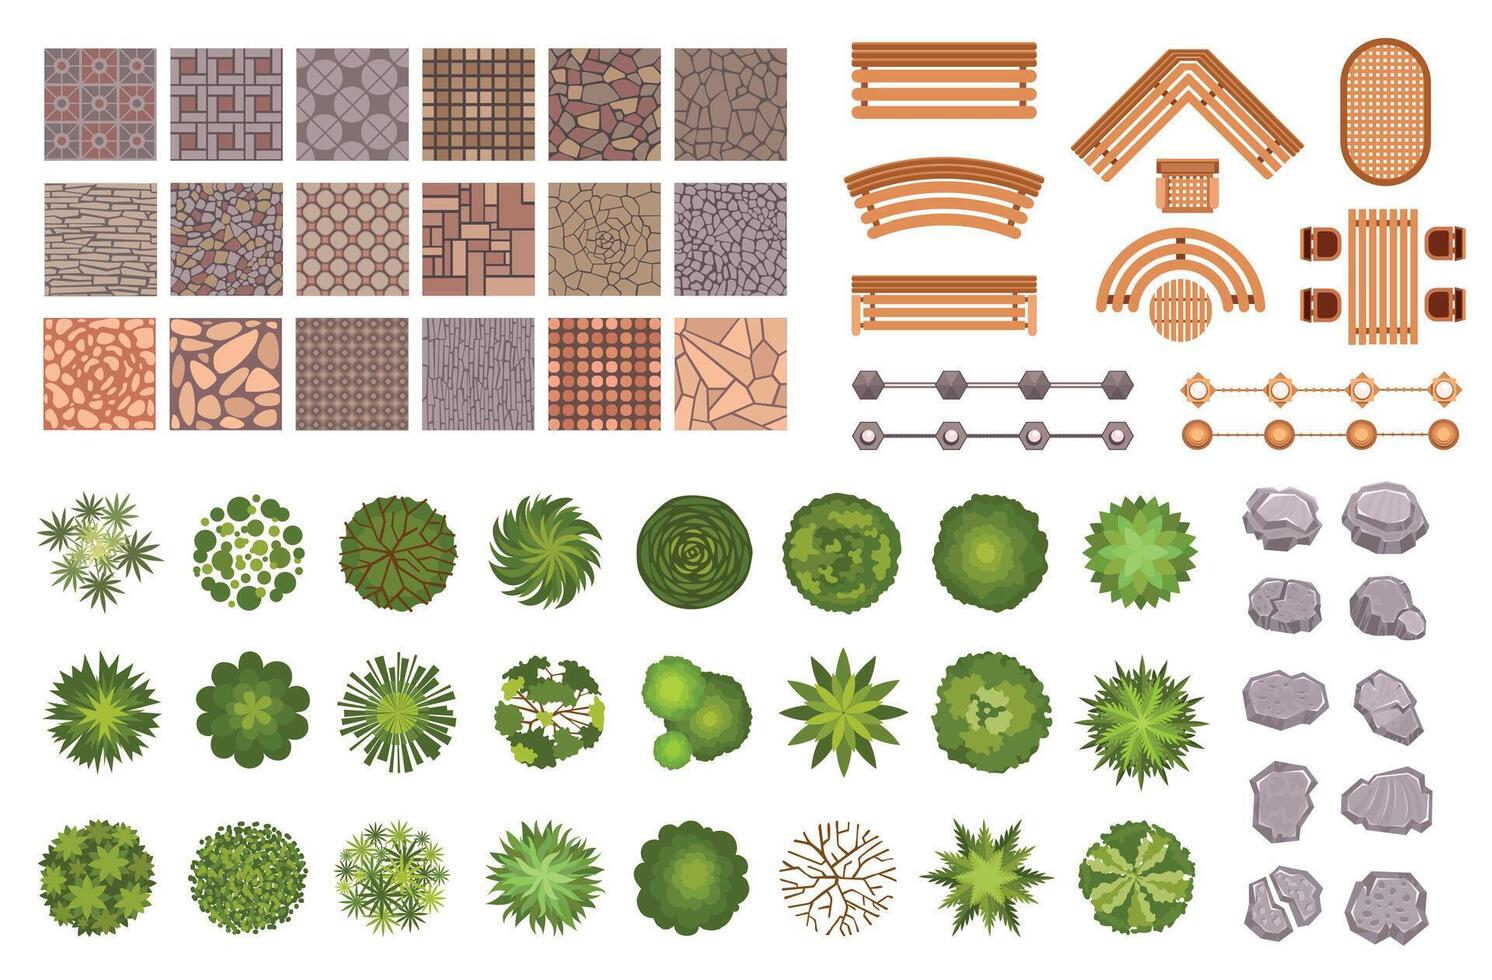 City park landscape design map elements top view. Garden trees and plant, benches, road path tile and rocks from above. Park plan vector set